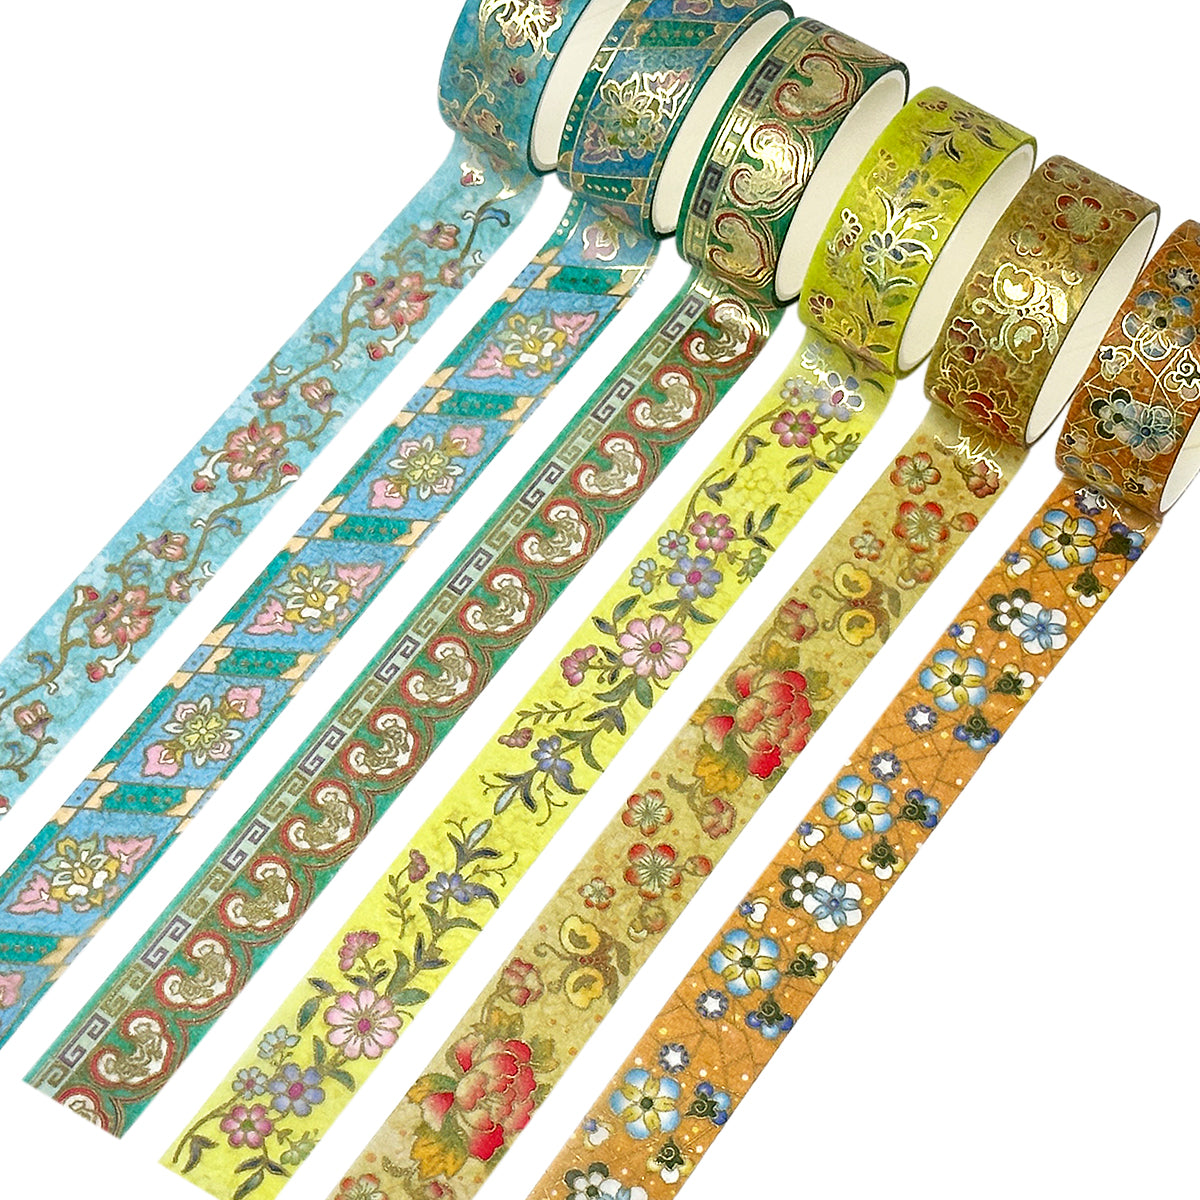 Wrapables Colorful Washi Masking Tape, Golden Pineapple Pink